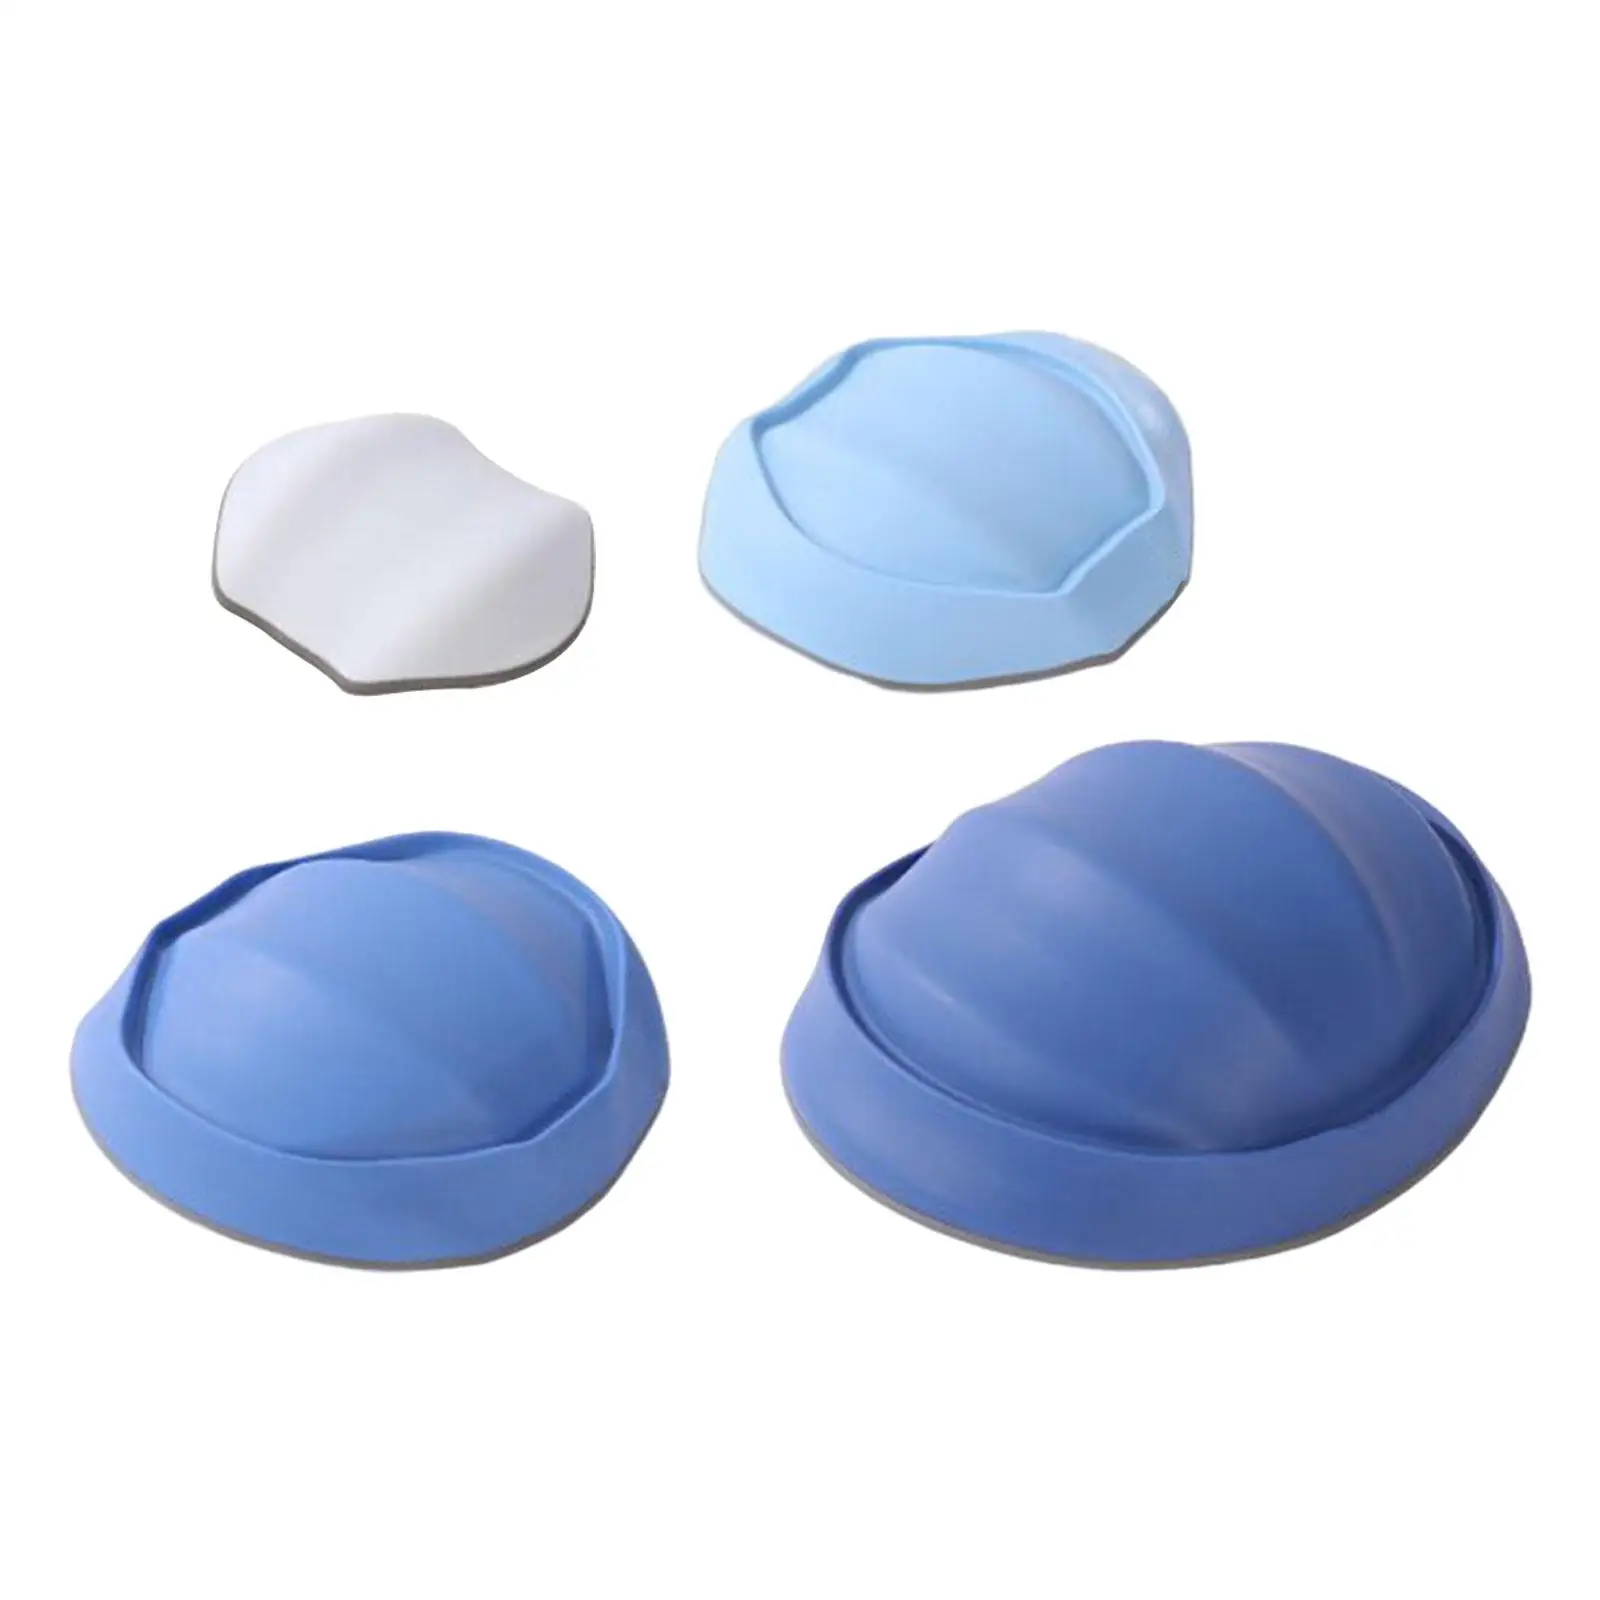 Set of 4pcs Stepping Stones for Kids Balance with Non Slip Bottom Exercise Coordination and Stability